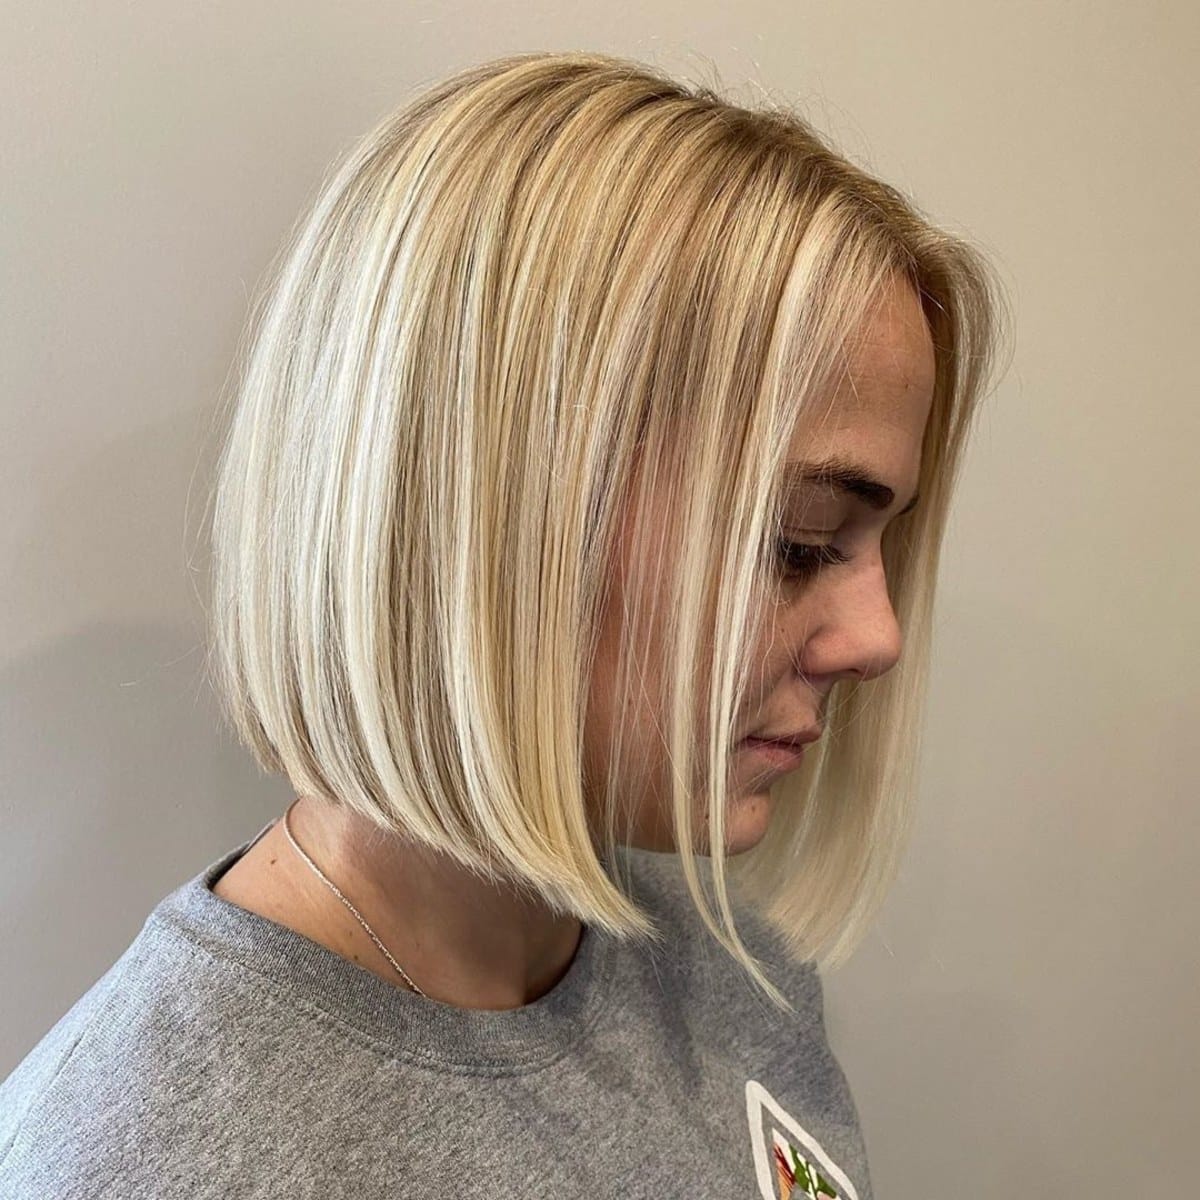 12 Short Blonde Hairstyle Ideas for Summer | Wella Professionals